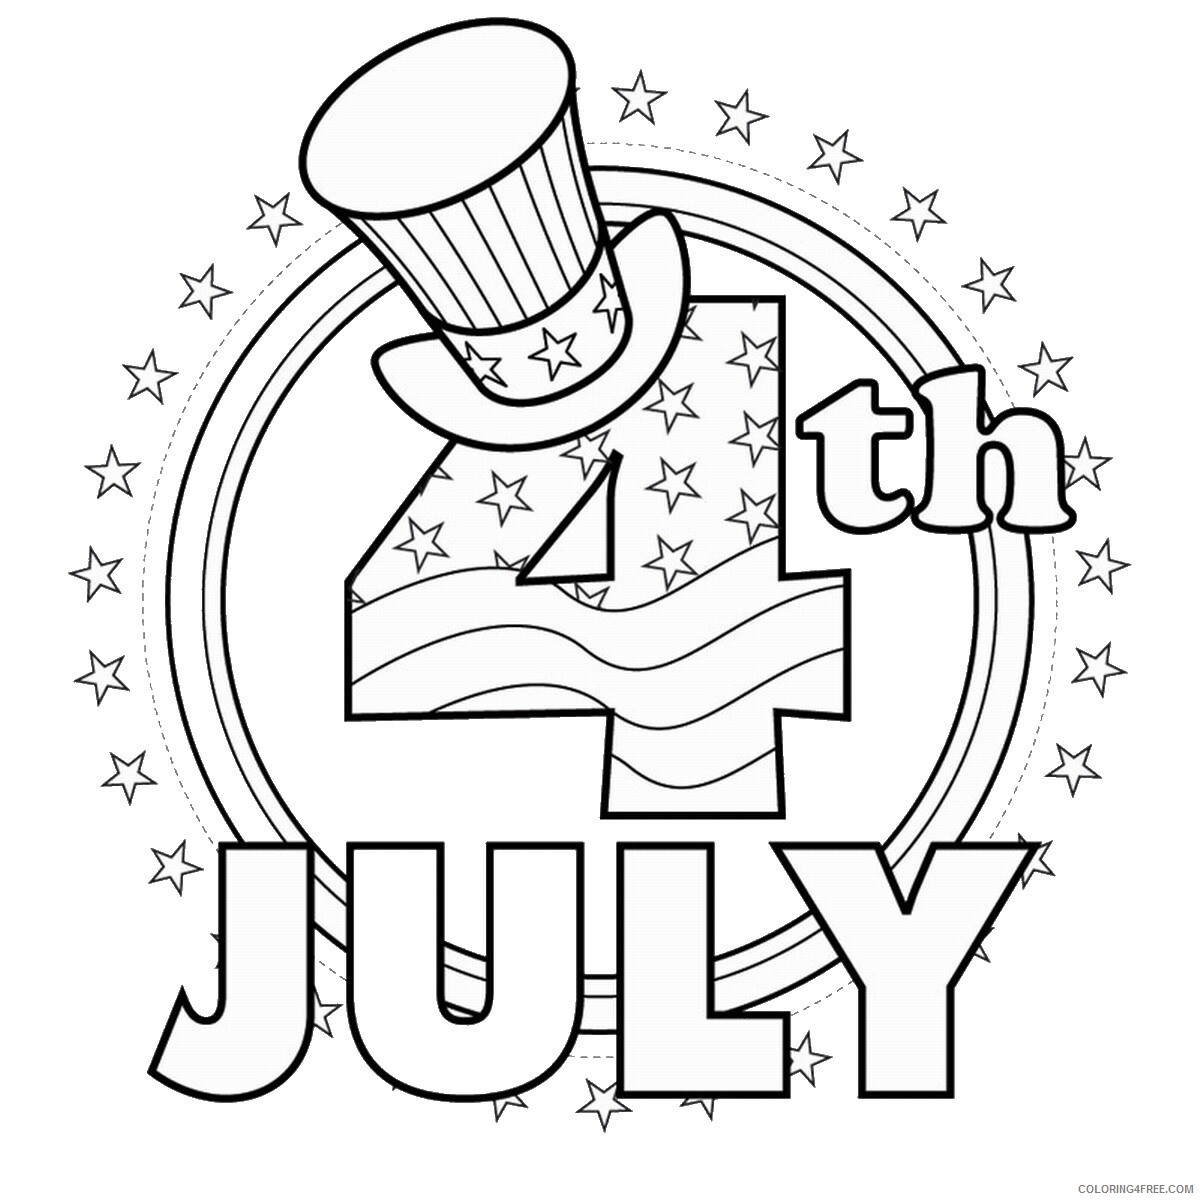 4th of July Coloring Pages 4th_july_coloring15 Printable 2021 0004 Coloring4free